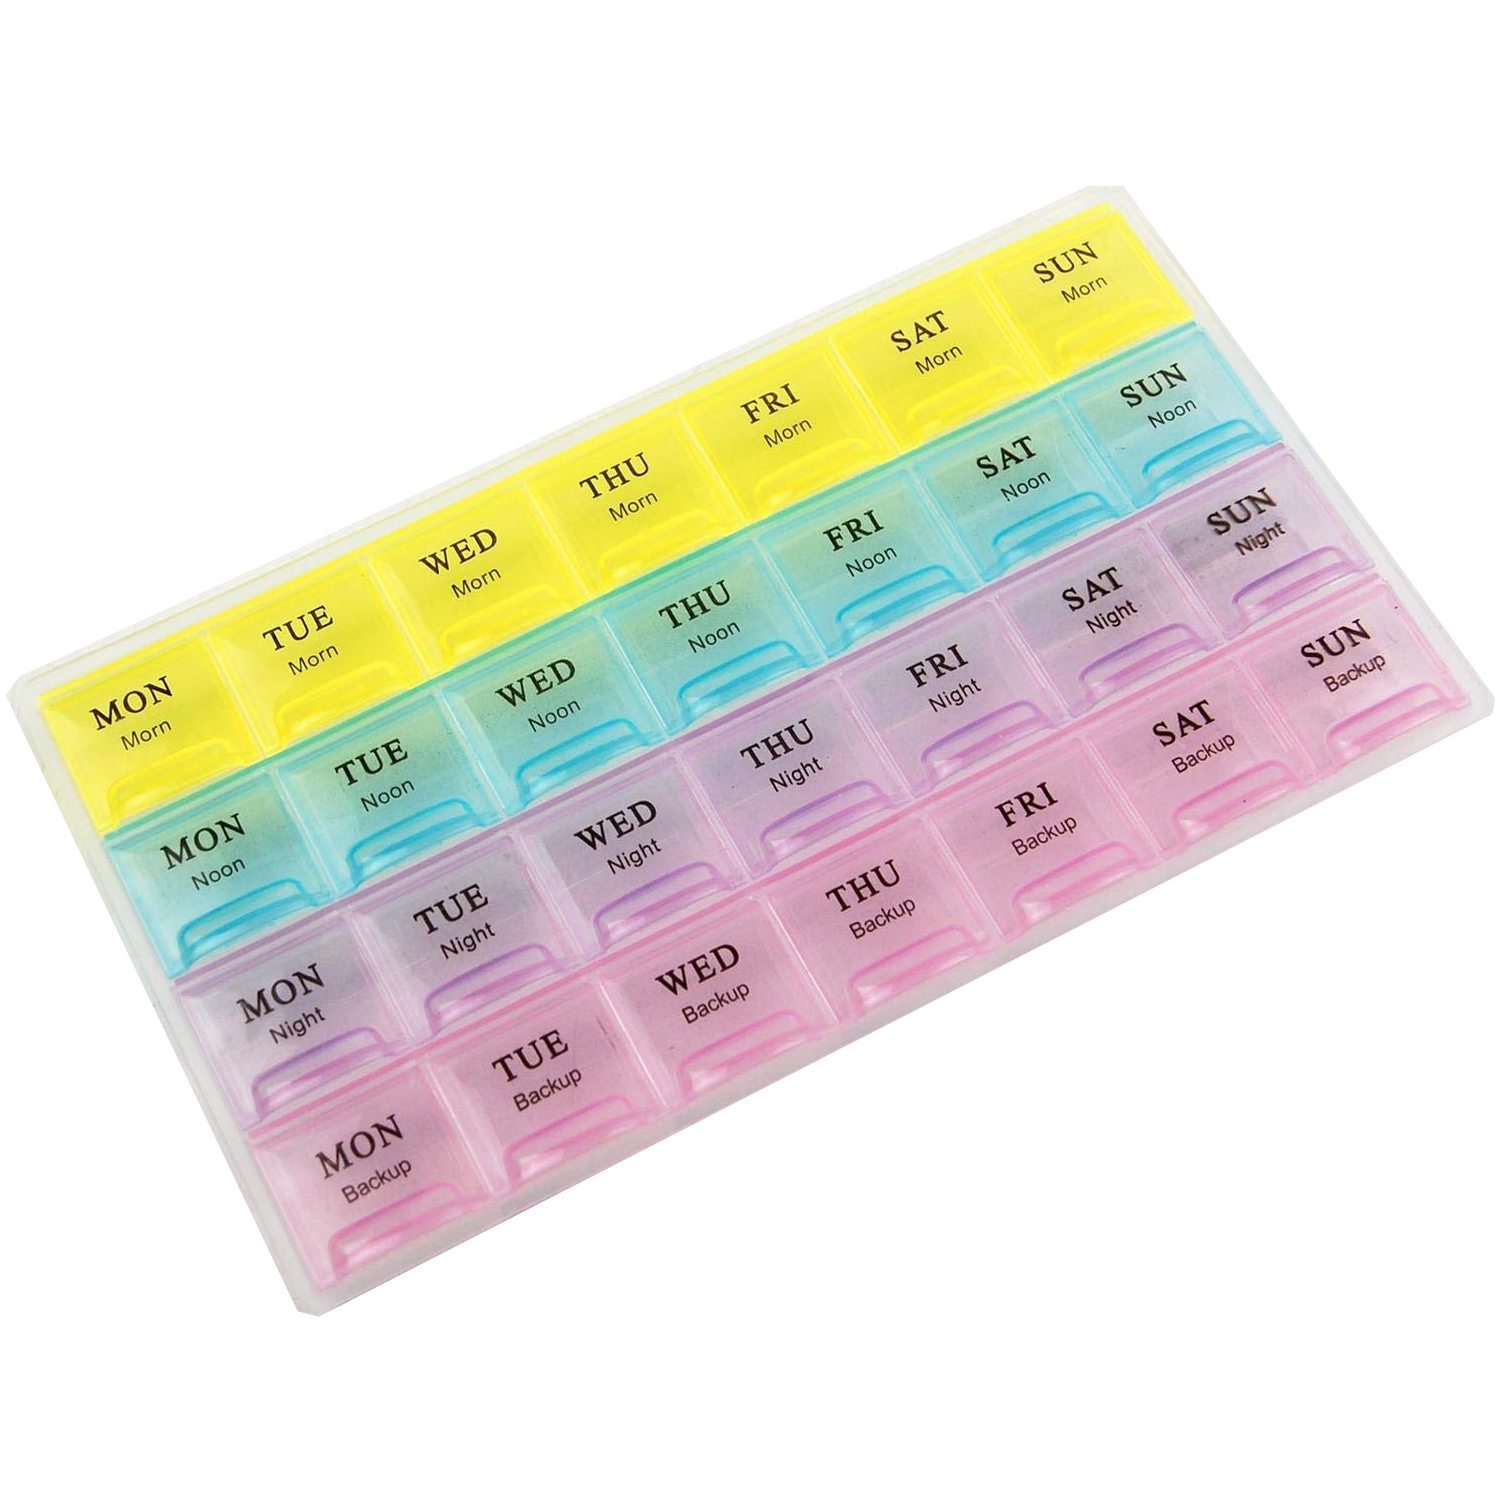 ISTAR 28 Slot 7 Days Weekly 4 Times a Day Morning Afternoon Evening Night Pill Medicine Box Weekly Portable Large-capacity Sub-packing Storage Box